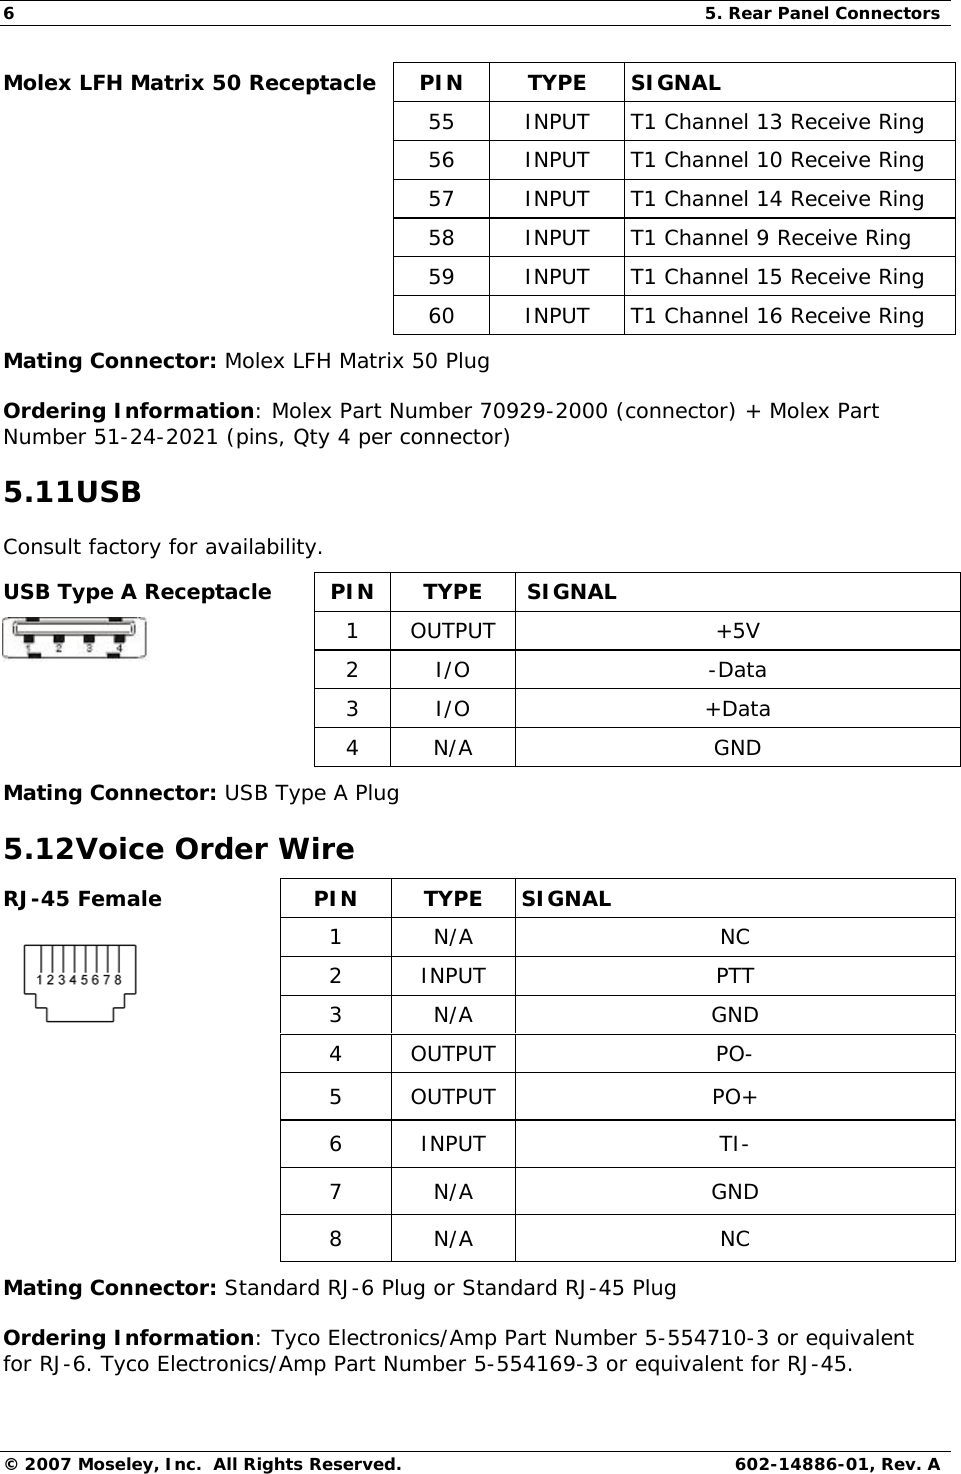 6  5. Rear Panel Connectors © 2007 Moseley, Inc.  All Rights Reserved.  602-14886-01, Rev. A Molex LFH Matrix 50 Receptacle  PIN  TYPE  SIGNAL   55  INPUT  T1 Channel 13 Receive Ring   56  INPUT  T1 Channel 10 Receive Ring   57  INPUT  T1 Channel 14 Receive Ring   58  INPUT  T1 Channel 9 Receive Ring   59  INPUT  T1 Channel 15 Receive Ring   60  INPUT  T1 Channel 16 Receive Ring Mating Connector: Molex LFH Matrix 50 Plug Ordering Information: Molex Part Number 70929-2000 (connector) + Molex Part Number 51-24-2021 (pins, Qty 4 per connector) 5.11USB Consult factory for availability. USB Type A Receptacle  PIN  TYPE  SIGNAL 1 OUTPUT  +5V  2 I/O  -Data  3 I/O +Data  4 N/A GND Mating Connector: USB Type A Plug 5.12Voice Order Wire Mating Connector: Standard RJ-6 Plug or Standard RJ-45 Plug Ordering Information: Tyco Electronics/Amp Part Number 5-554710-3 or equivalent for RJ-6. Tyco Electronics/Amp Part Number 5-554169-3 or equivalent for RJ-45. RJ-45 Female  PIN  TYPE  SIGNAL 1 N/A  NC 2 INPUT  PTT 3 N/A  GND  4 OUTPUT  PO-  5 OUTPUT  PO+  6 INPUT  TI-  7 N/A  GND  8 N/A  NC 